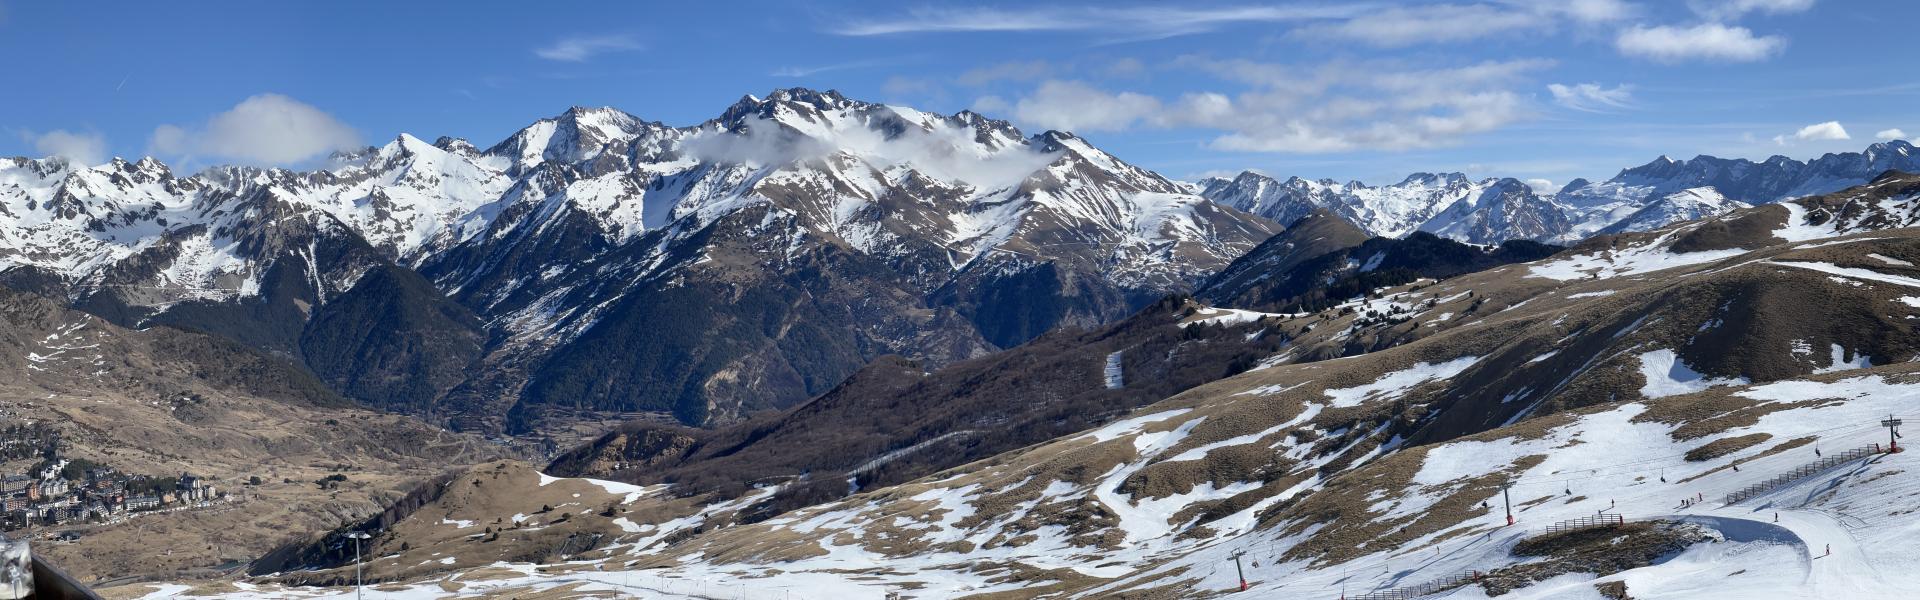 Formigal Scenic View